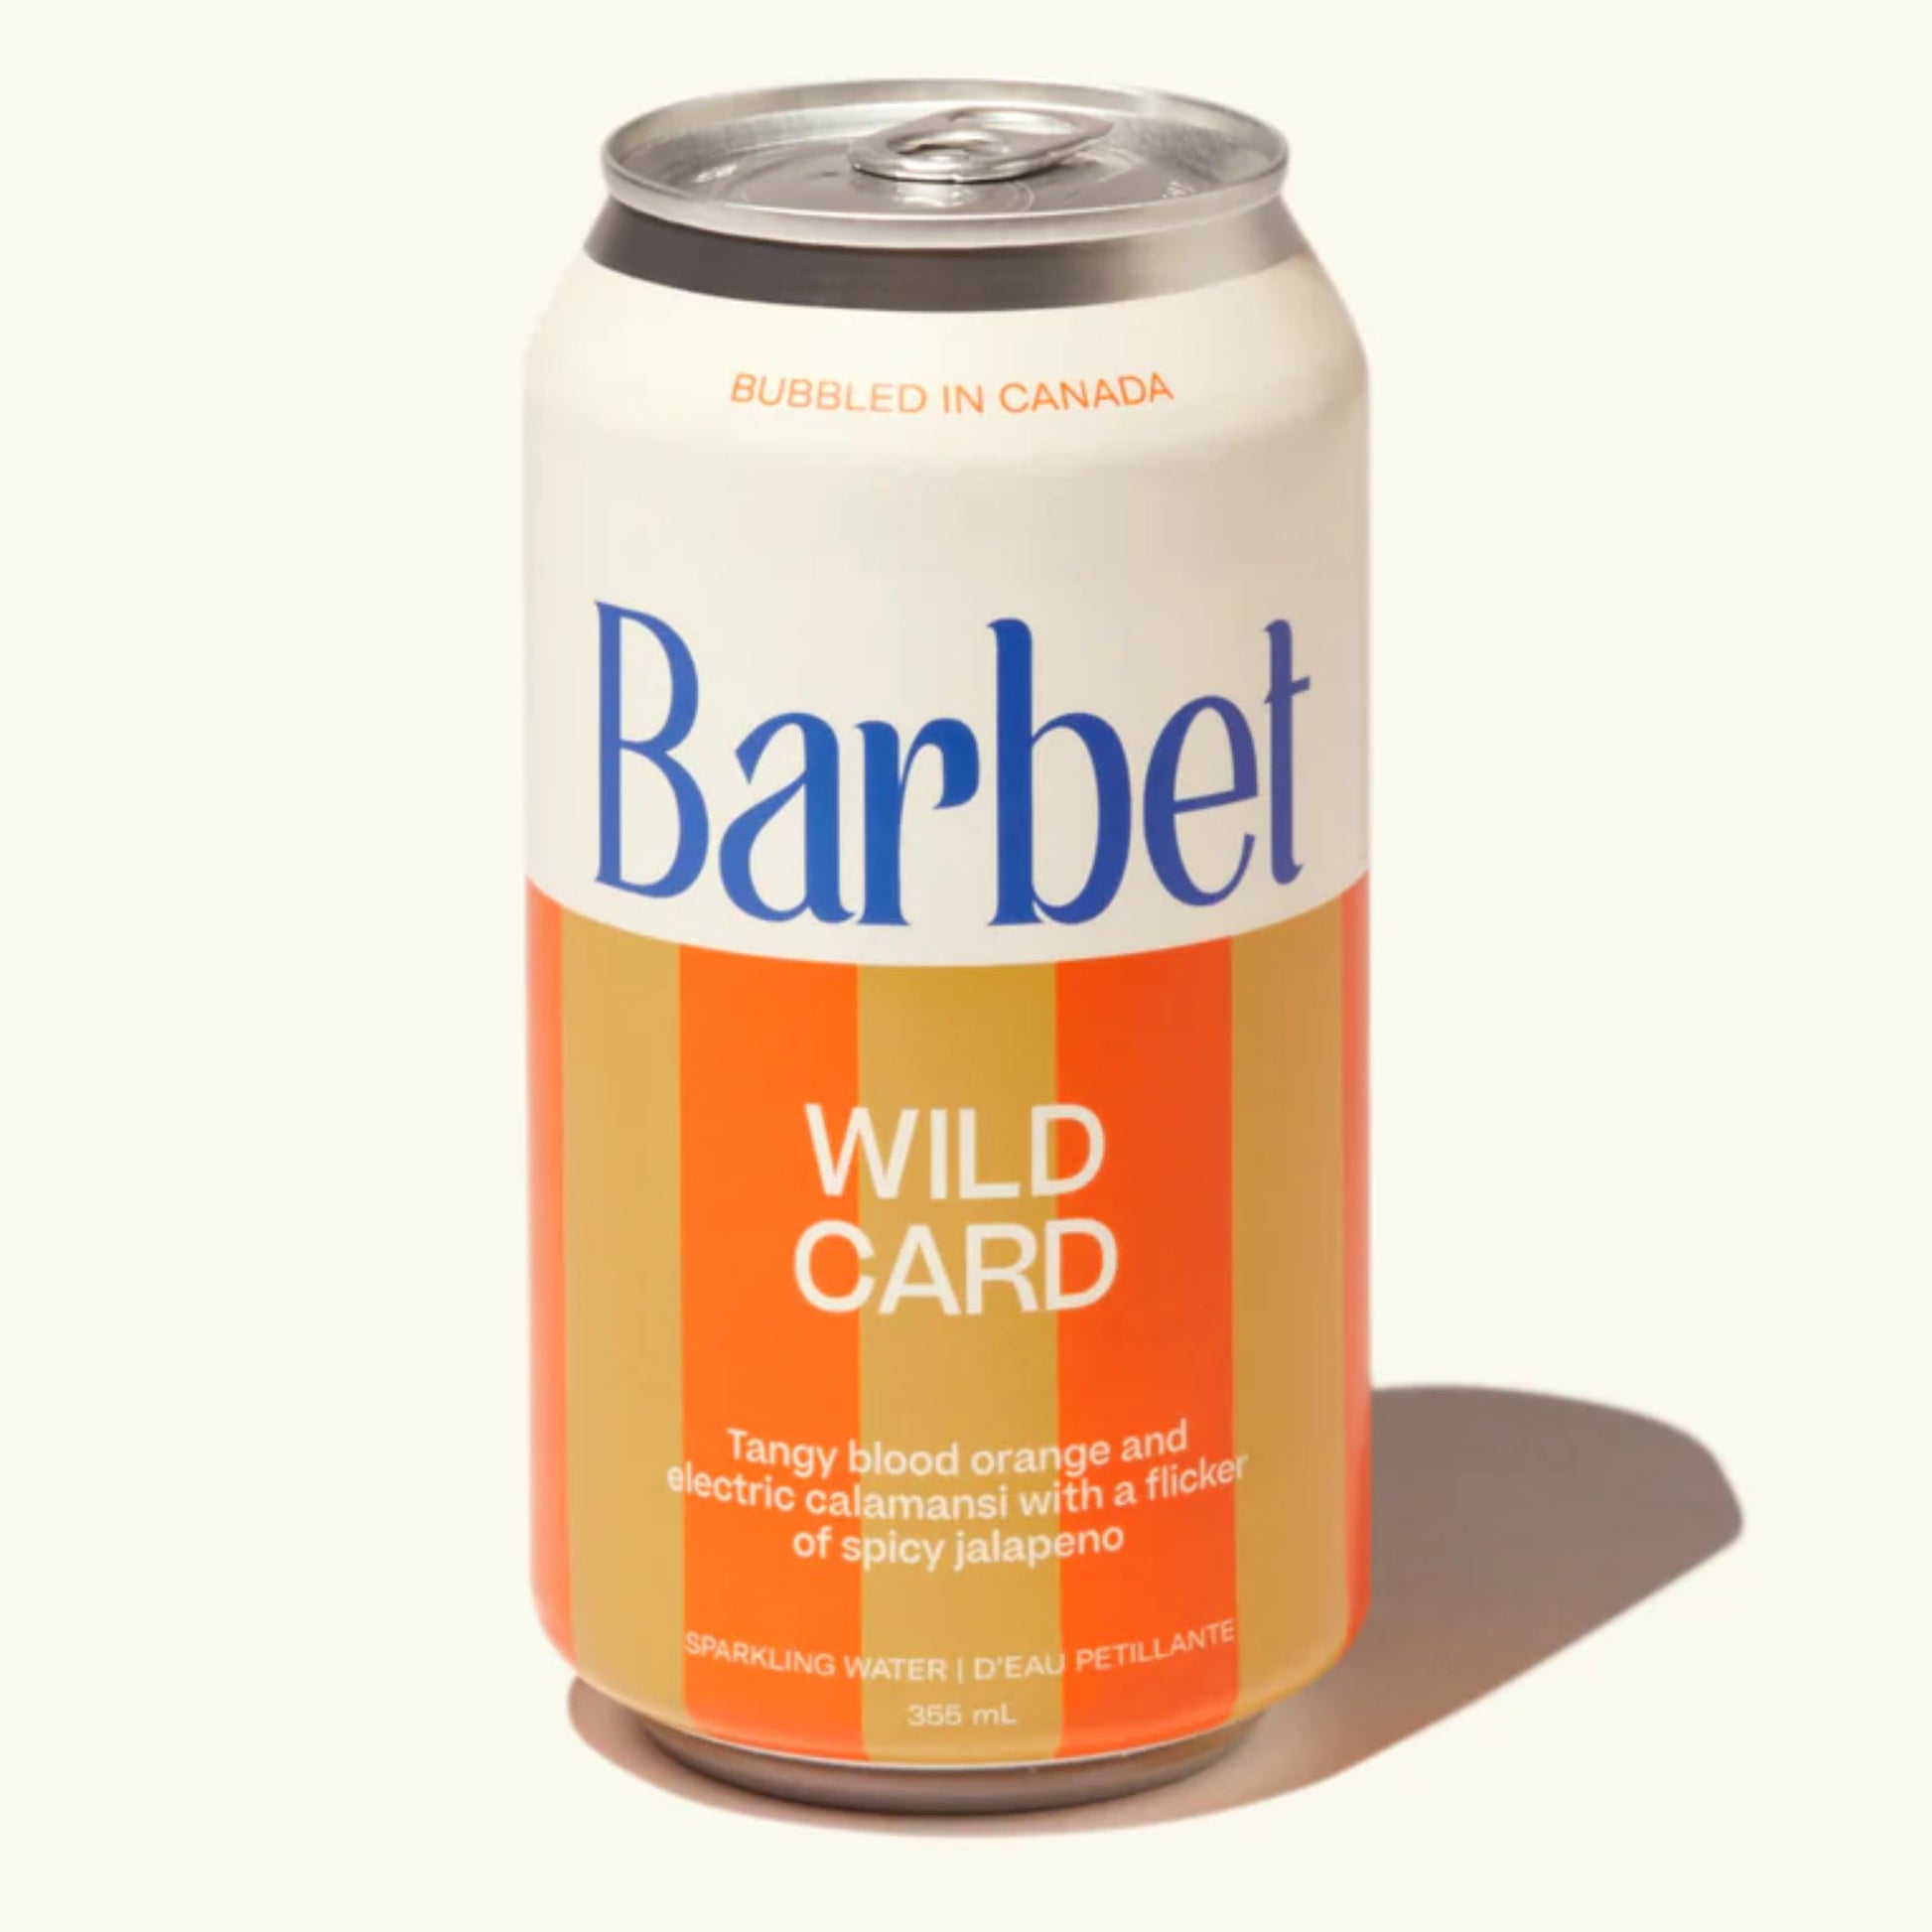 Barbet Wild Card is available for sale at Knyota Drinks in Ottawa.